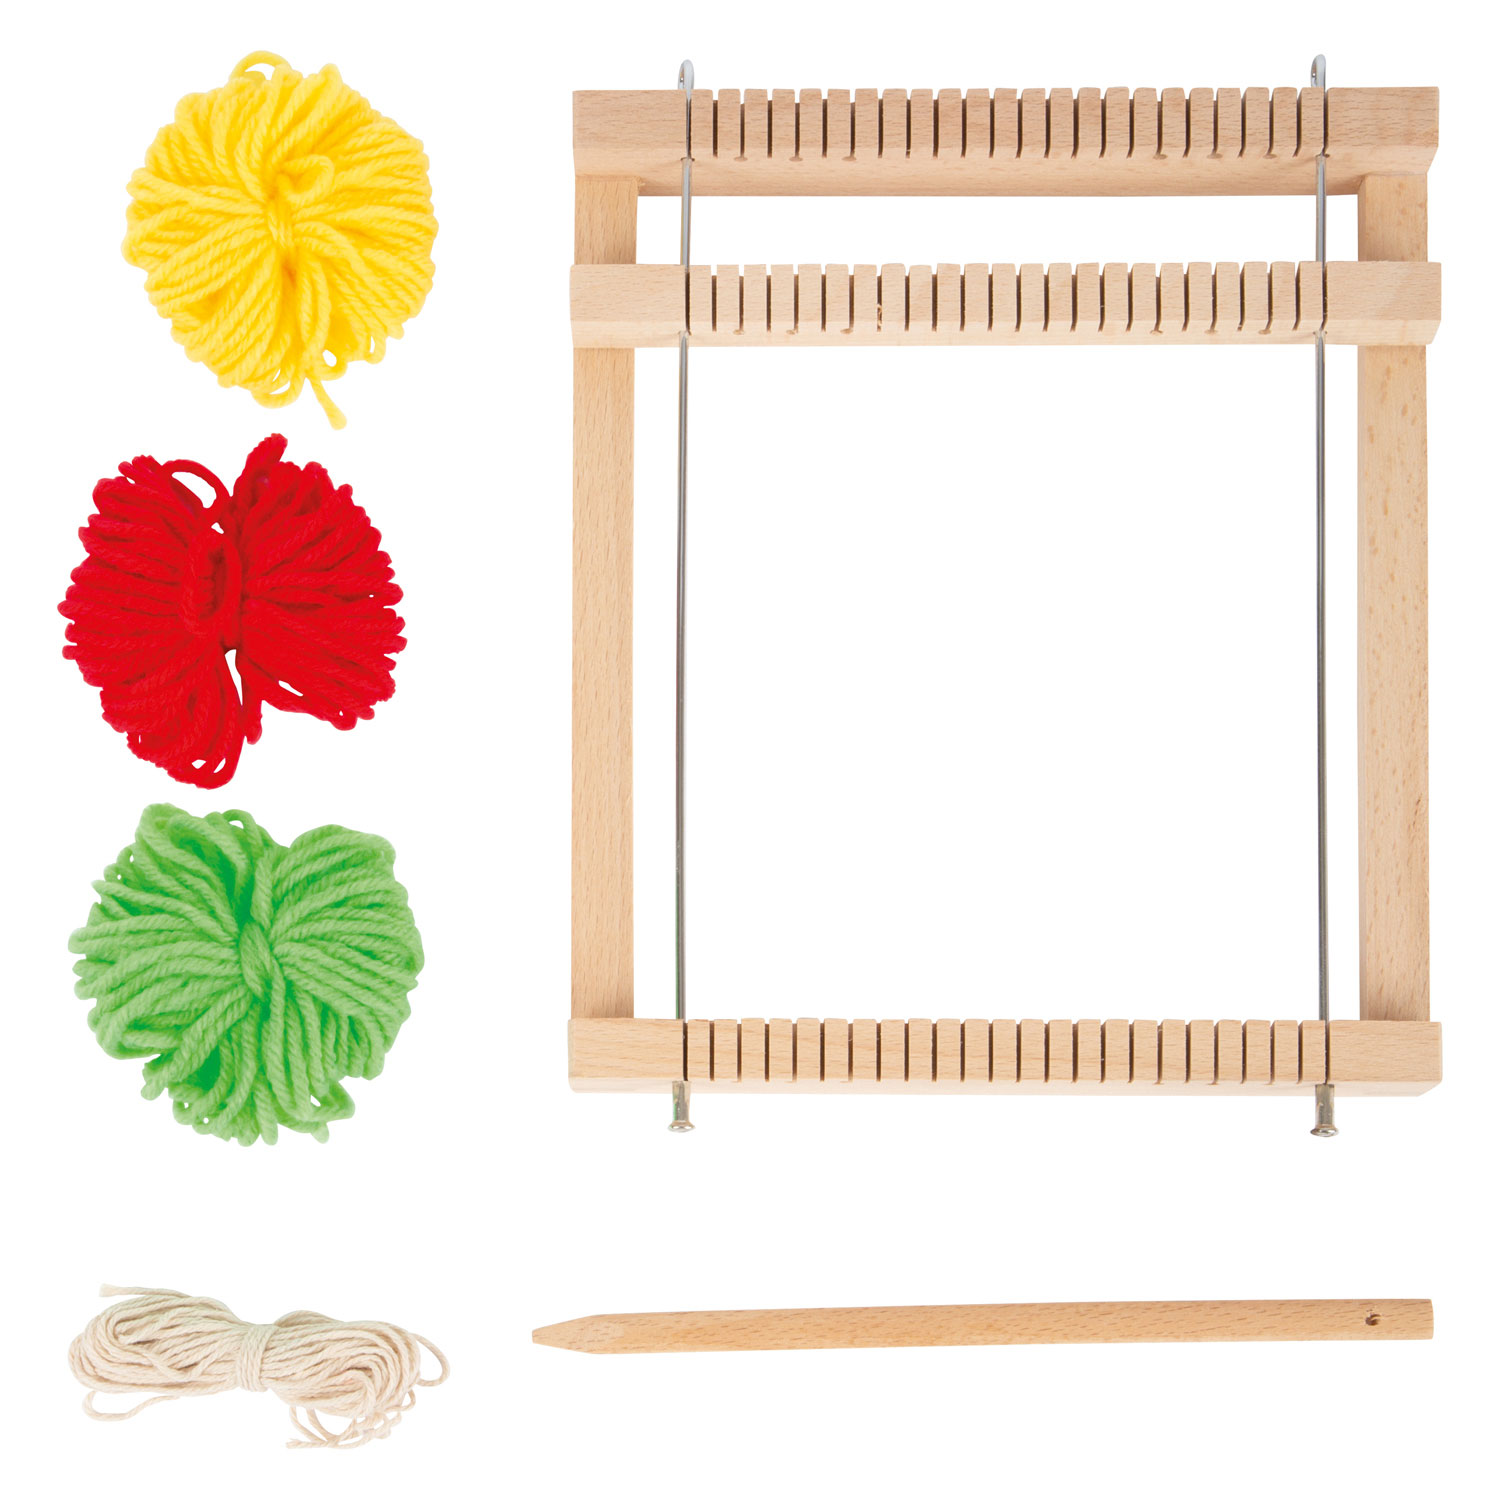 Small Foot - Wooden Loom Compact, 6-tlg.